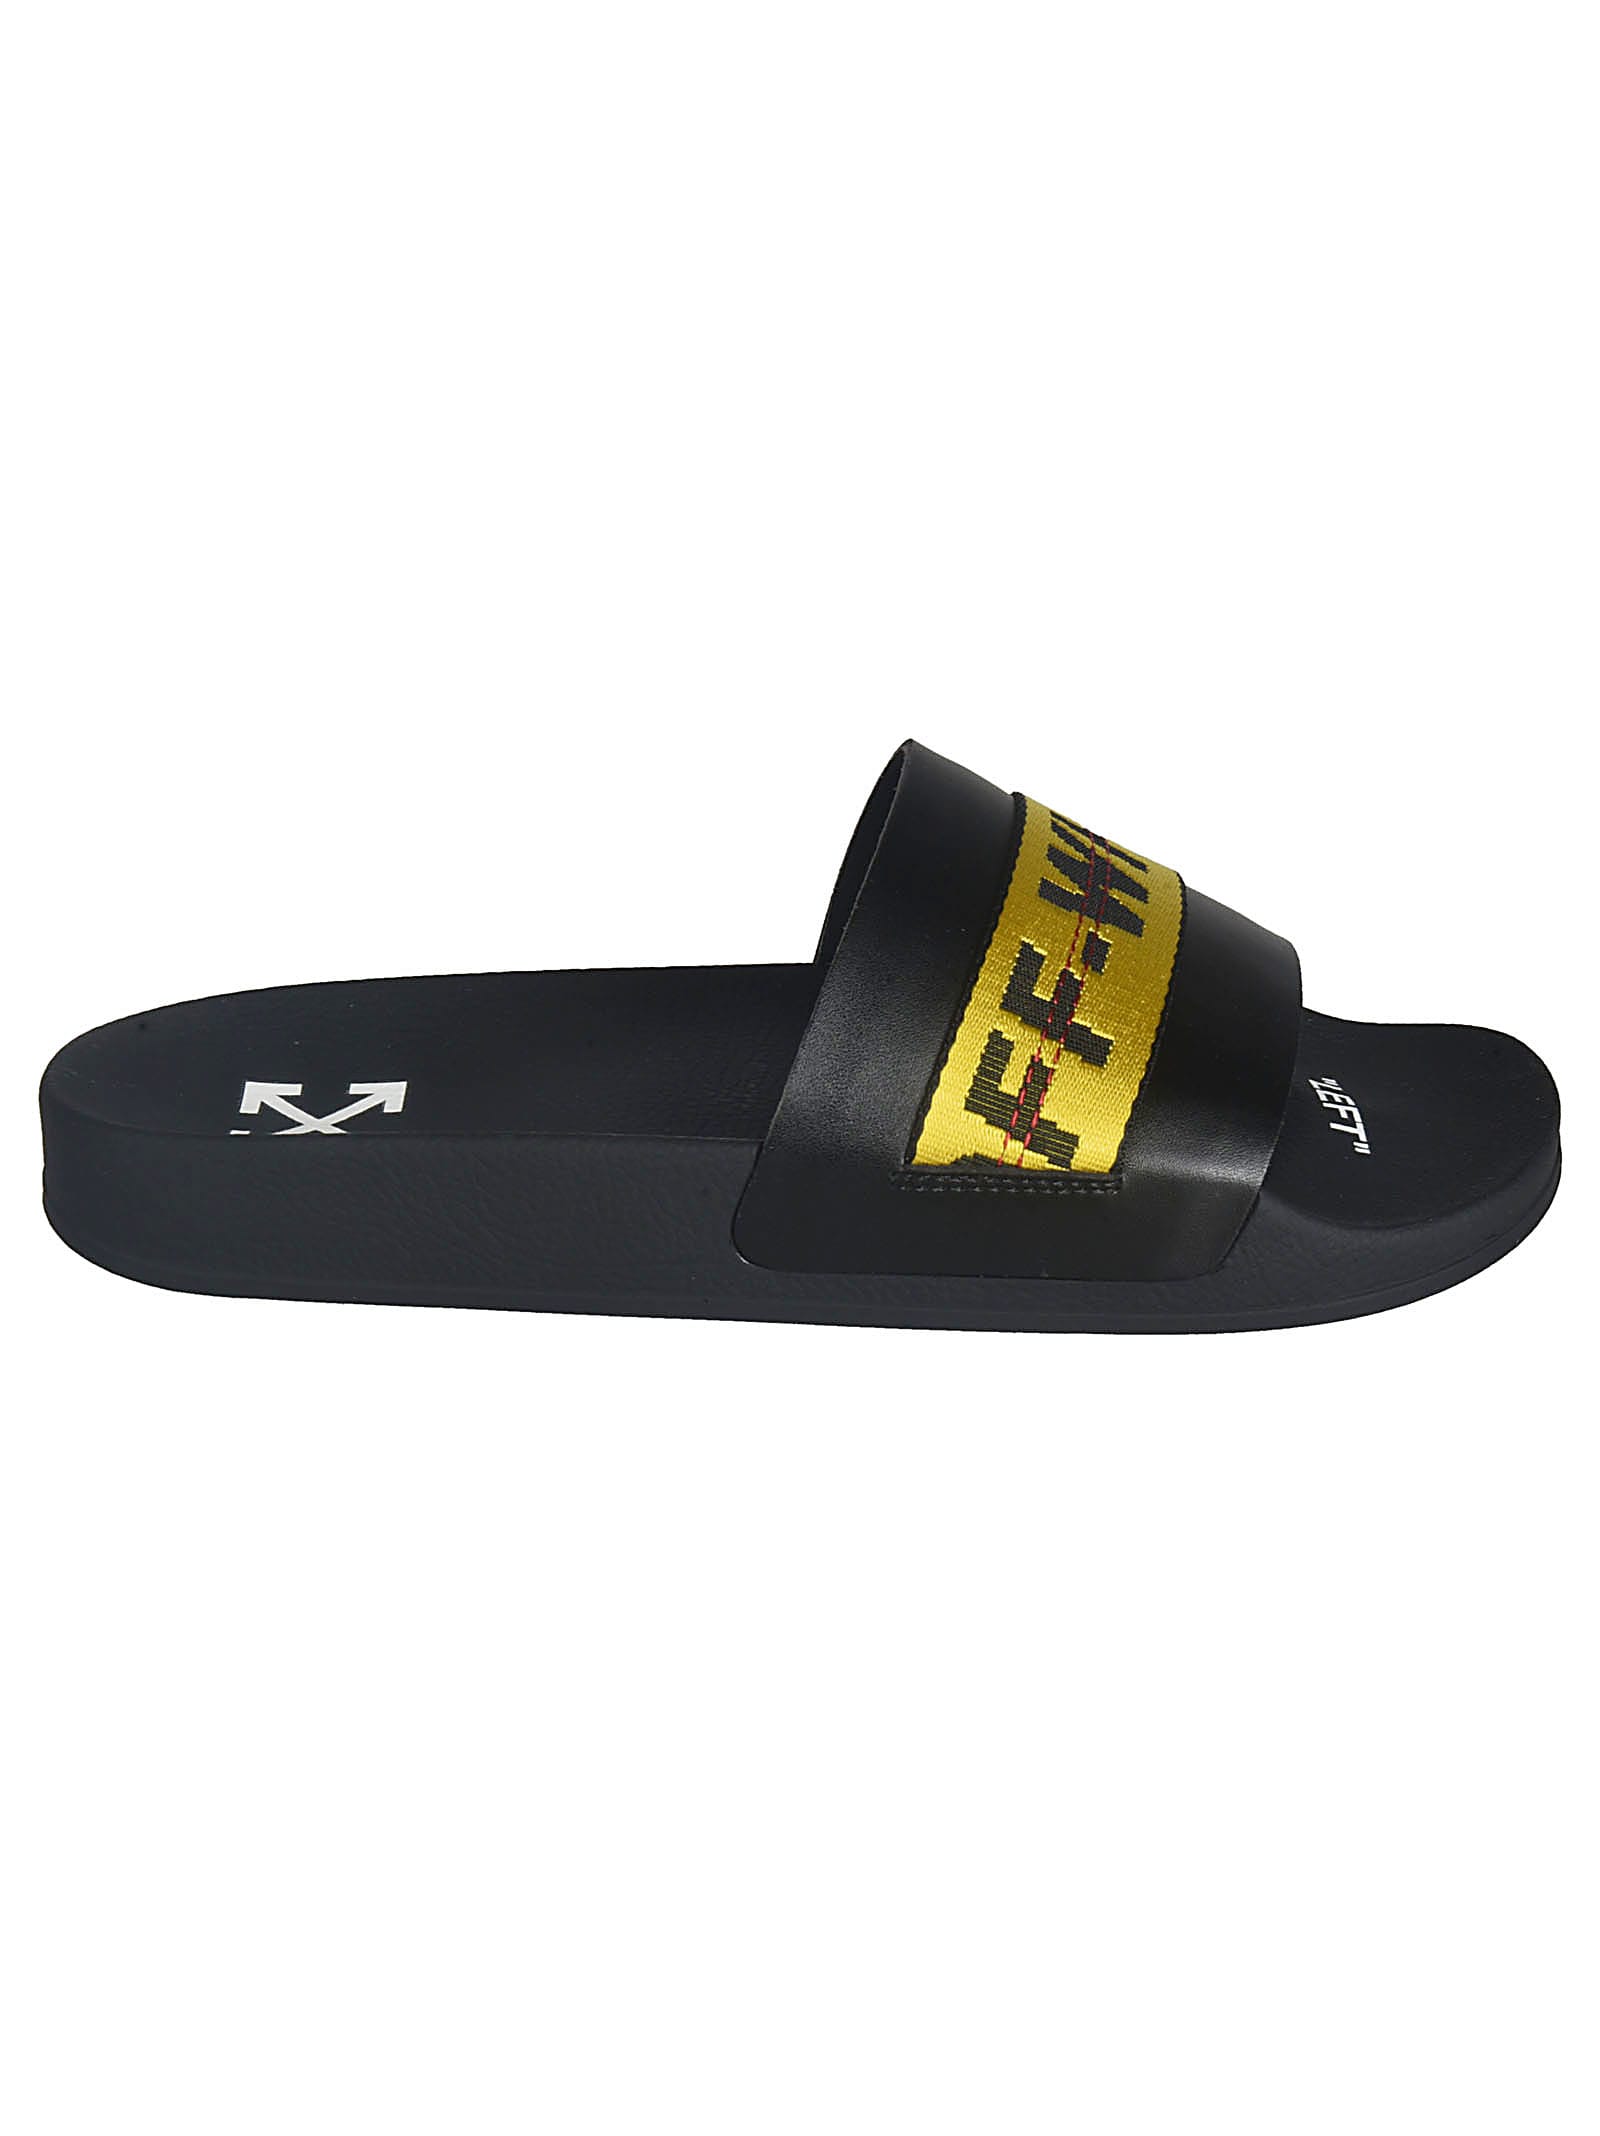 off white shoes black and yellow